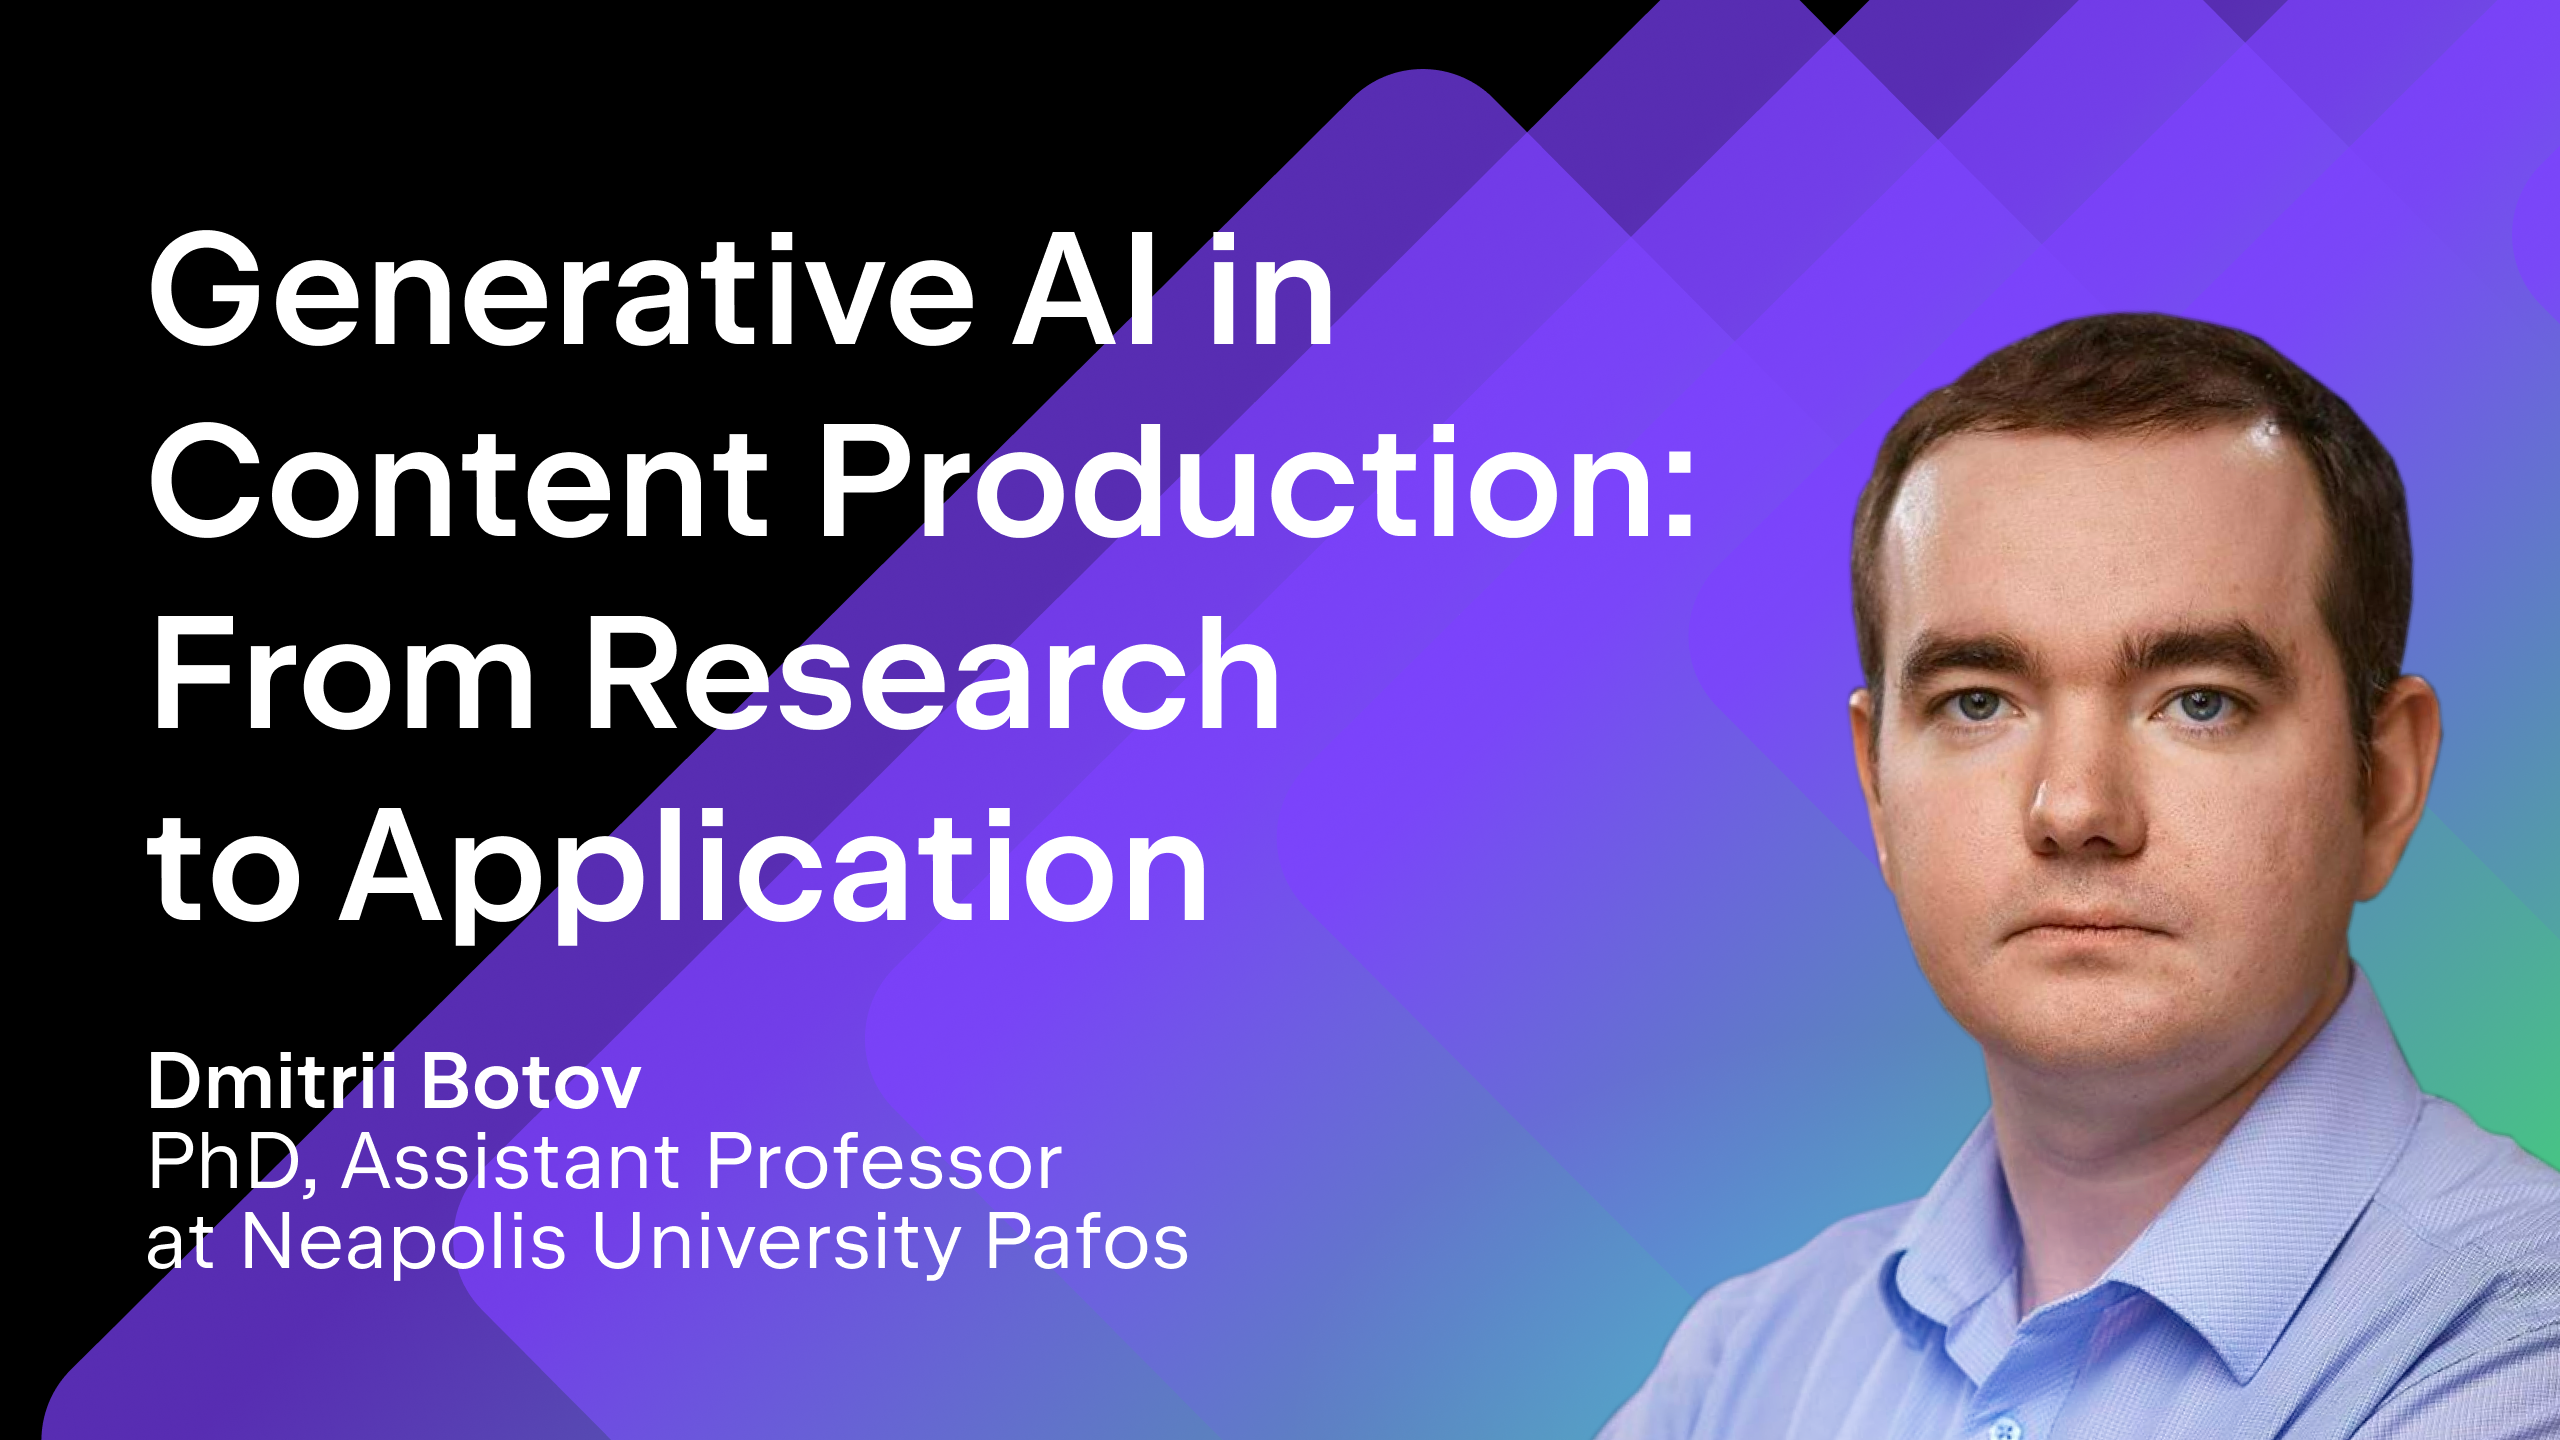 Generative AI in Content Production: From Research to Application. Dmitry Botov